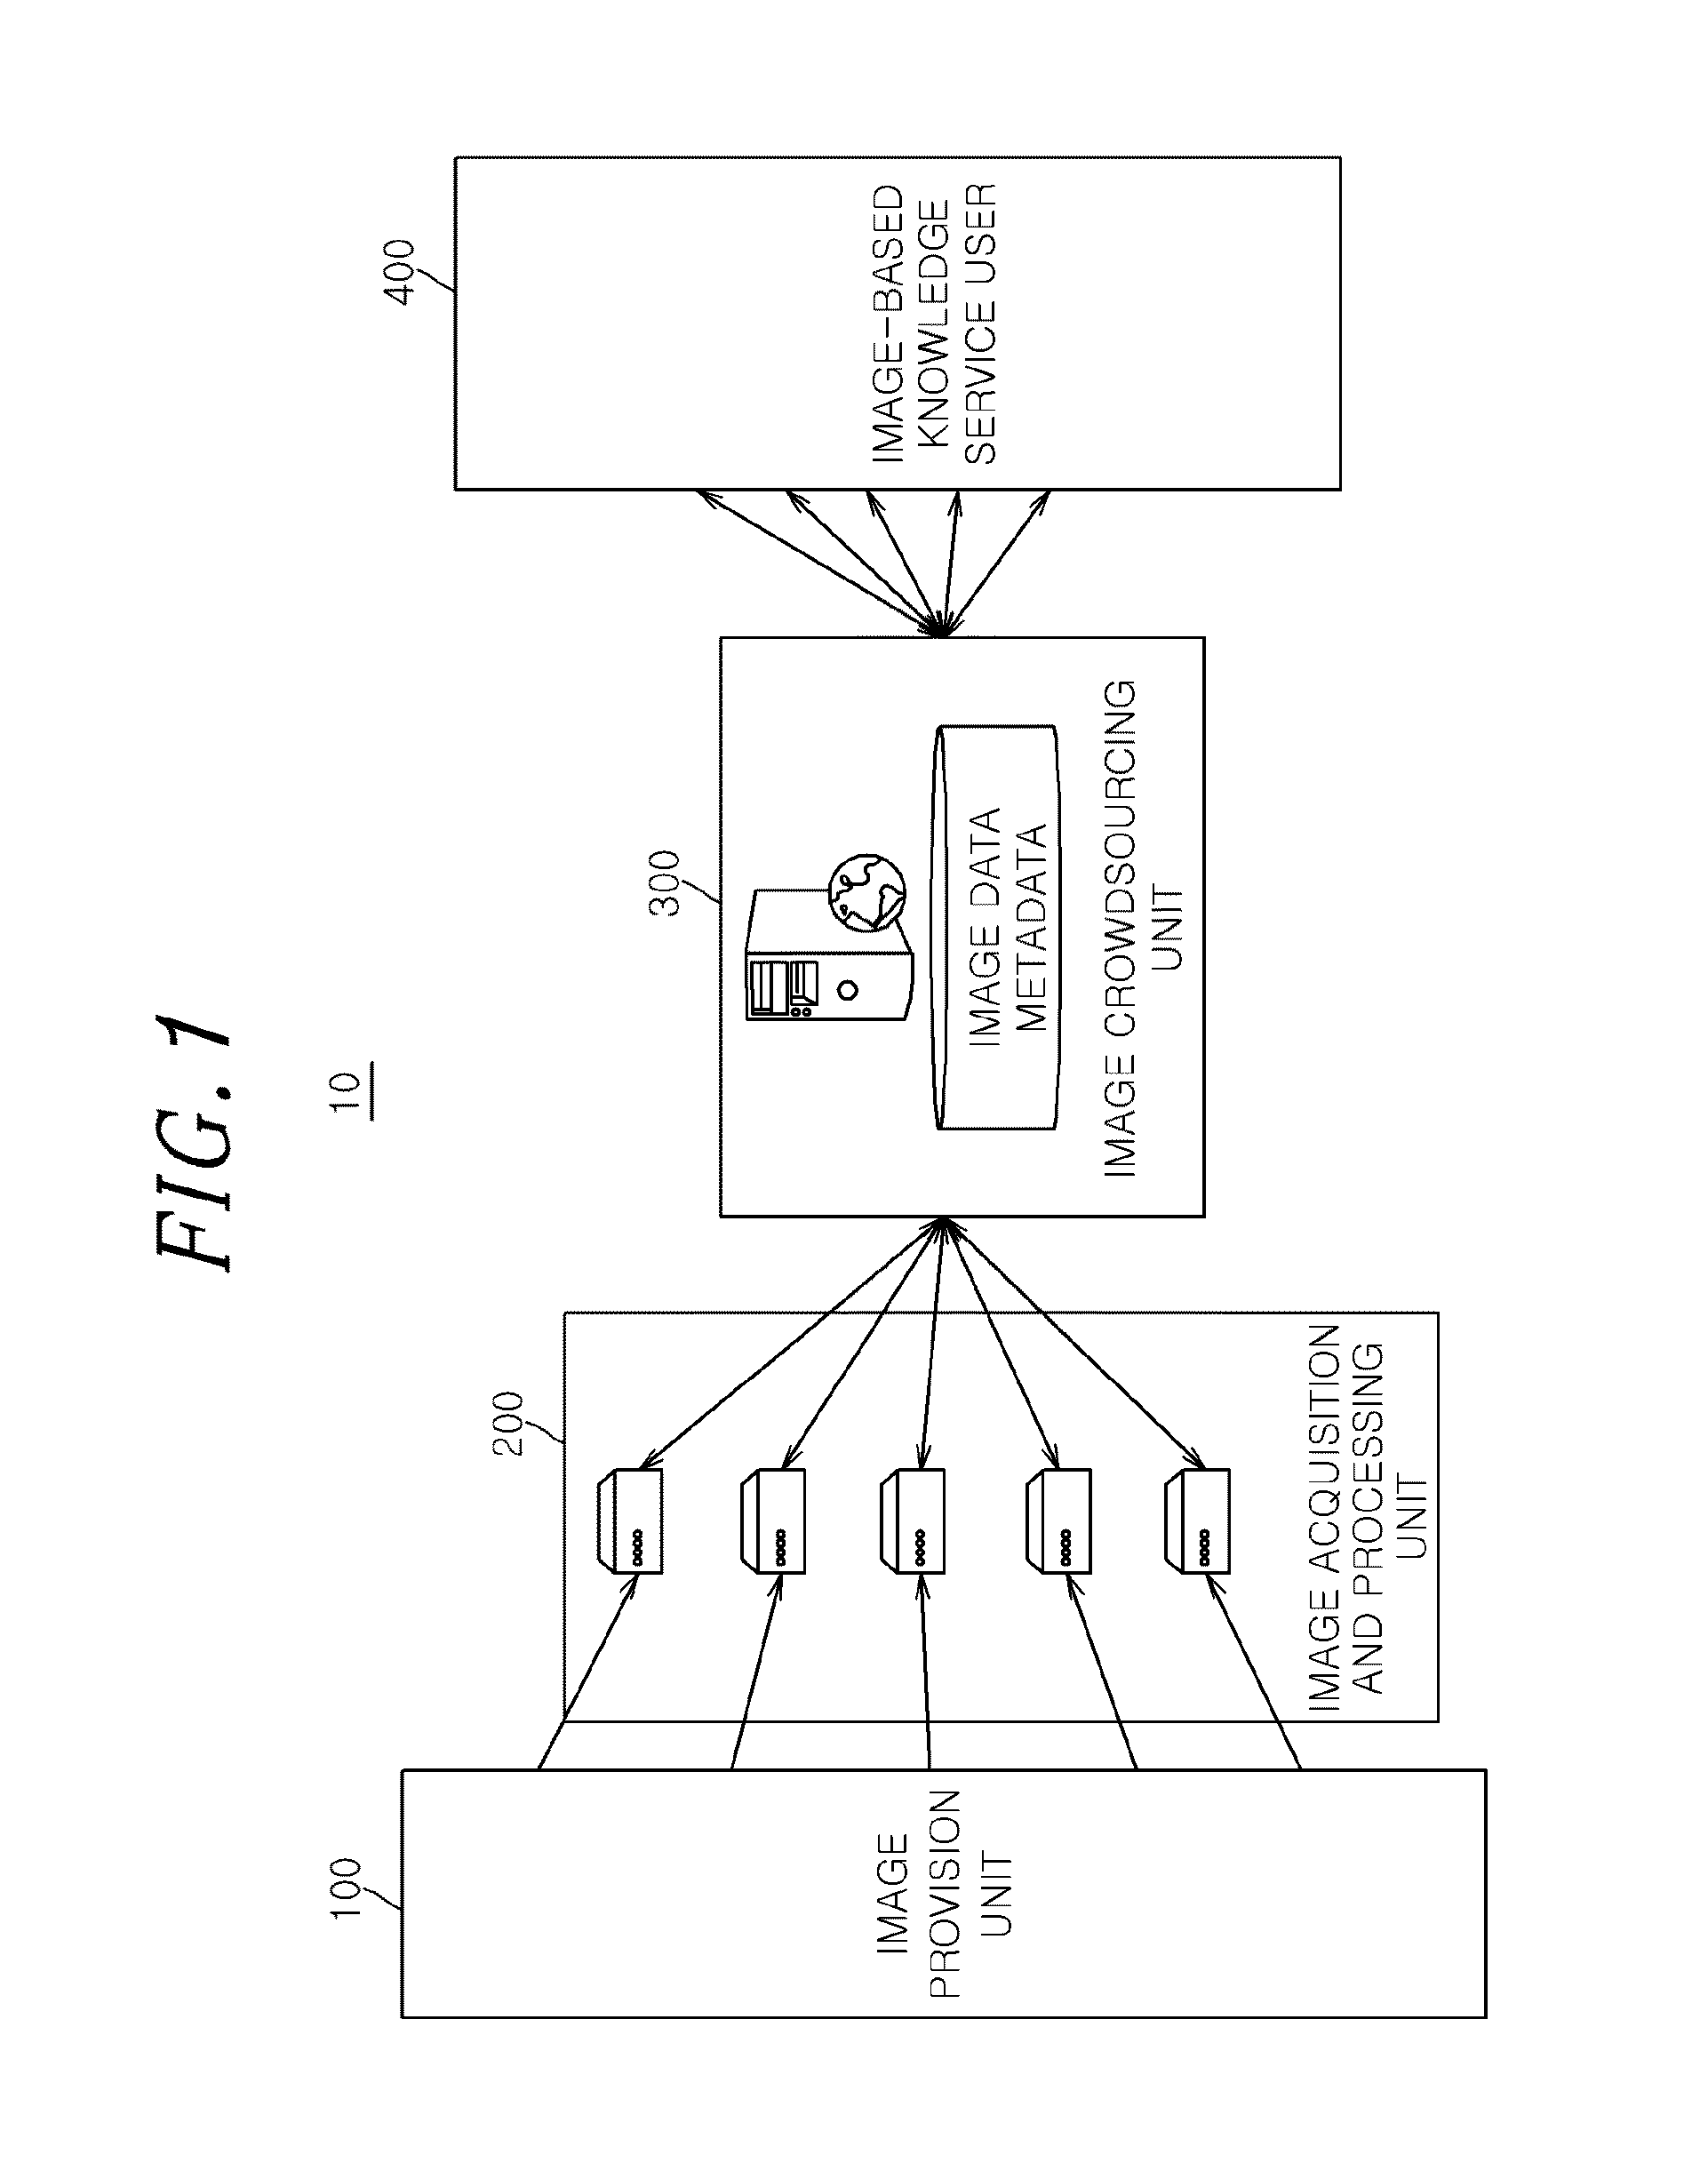 Method and system for generating image knowledge contents based on crowdsourcing